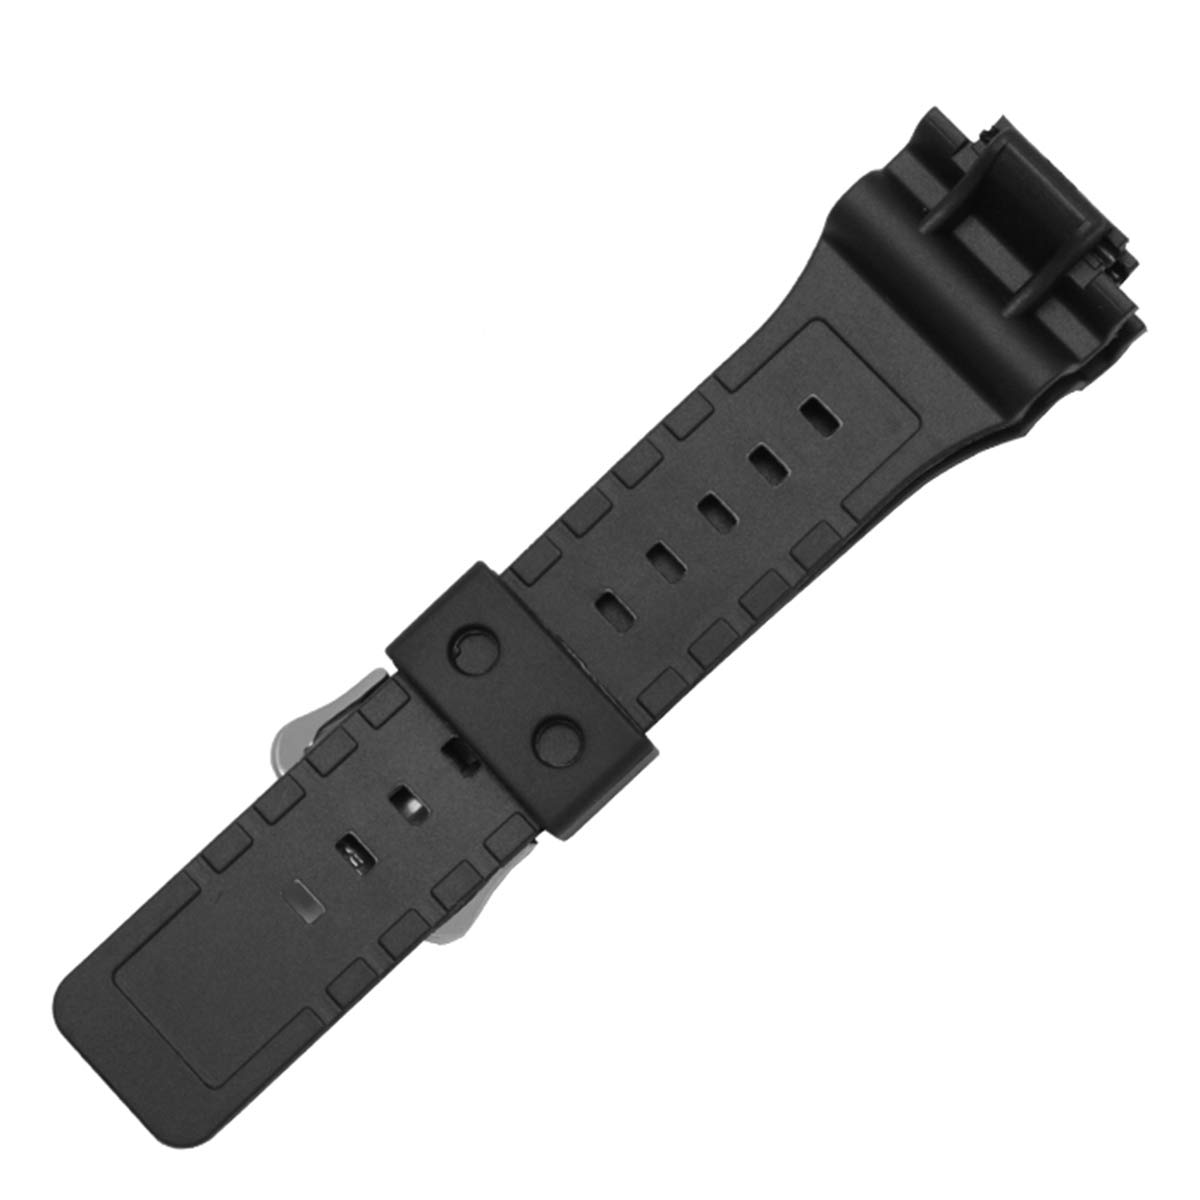 Waterproof Natural Resin Replacement Watch Band for Casio SGW-300H AE-1200 W-800H AQ- S800W AQ-S810W